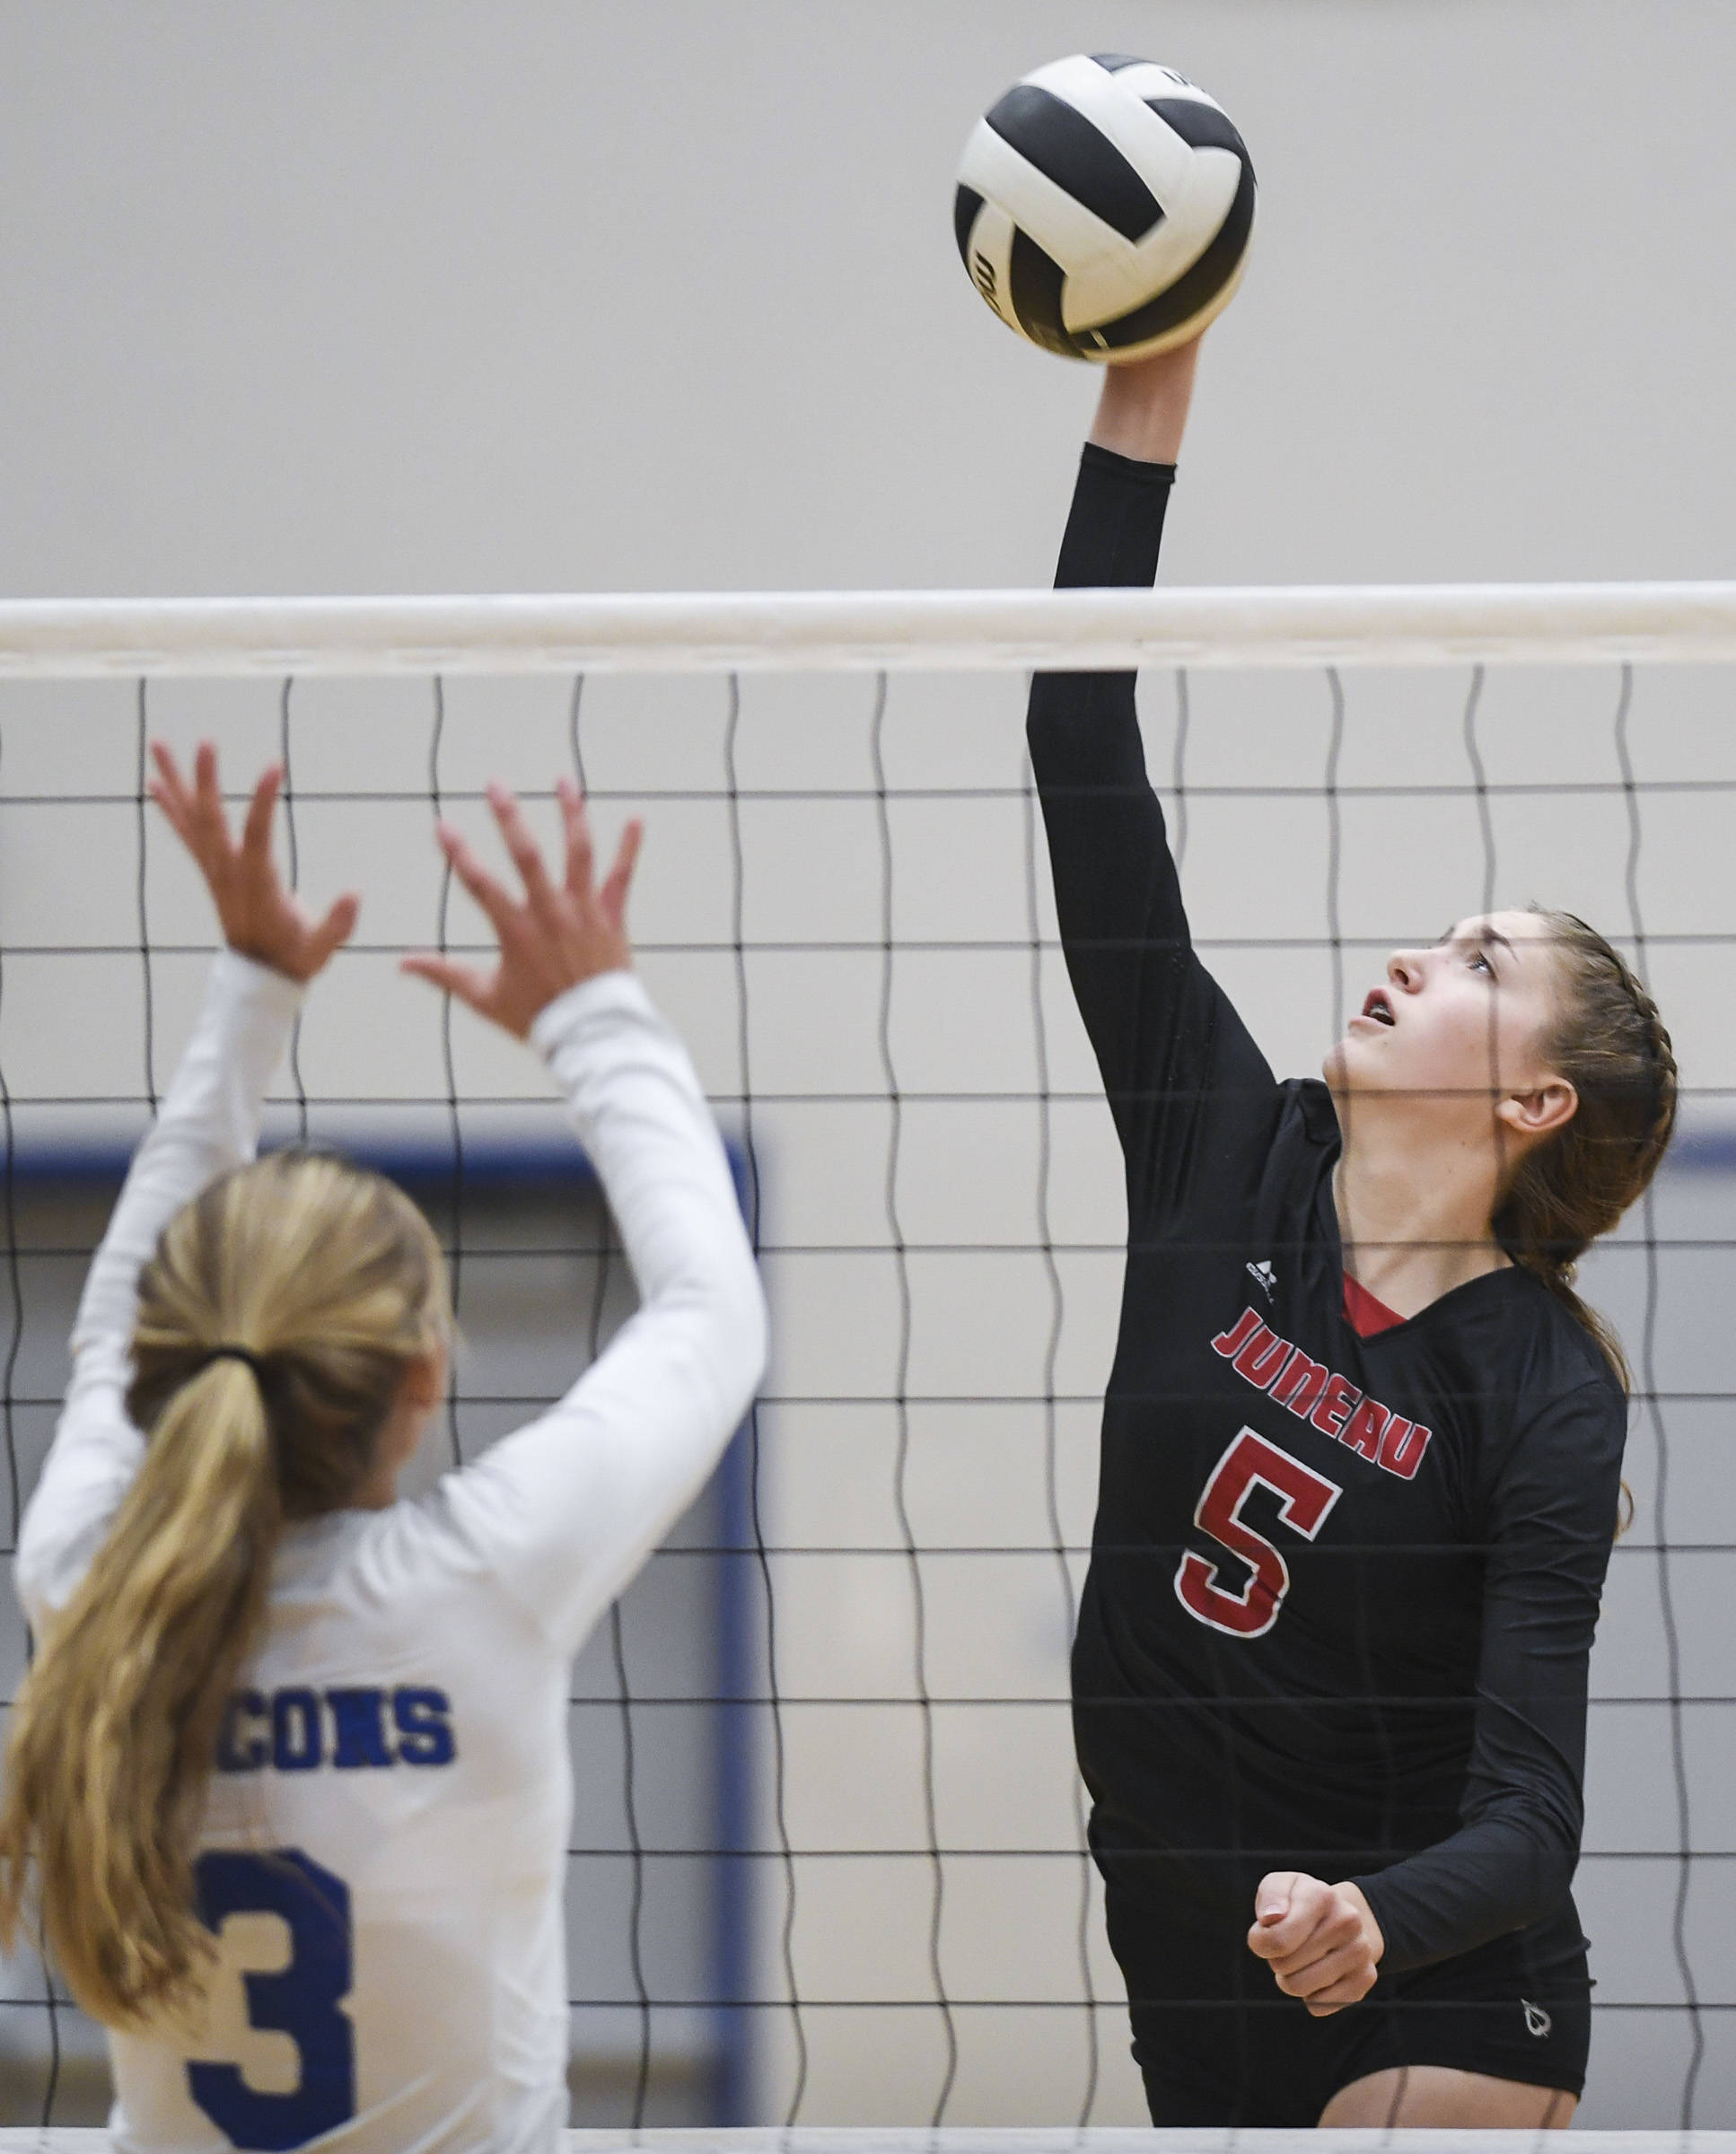 Juneau-Douglas’ Brooke Sanford, right, spikes the ball against Thunder Mountain’s Lily Smith at Thunder Mountain High School on Friday, Oct. 4, 2019. (Michael Penn | Juneau Empire)